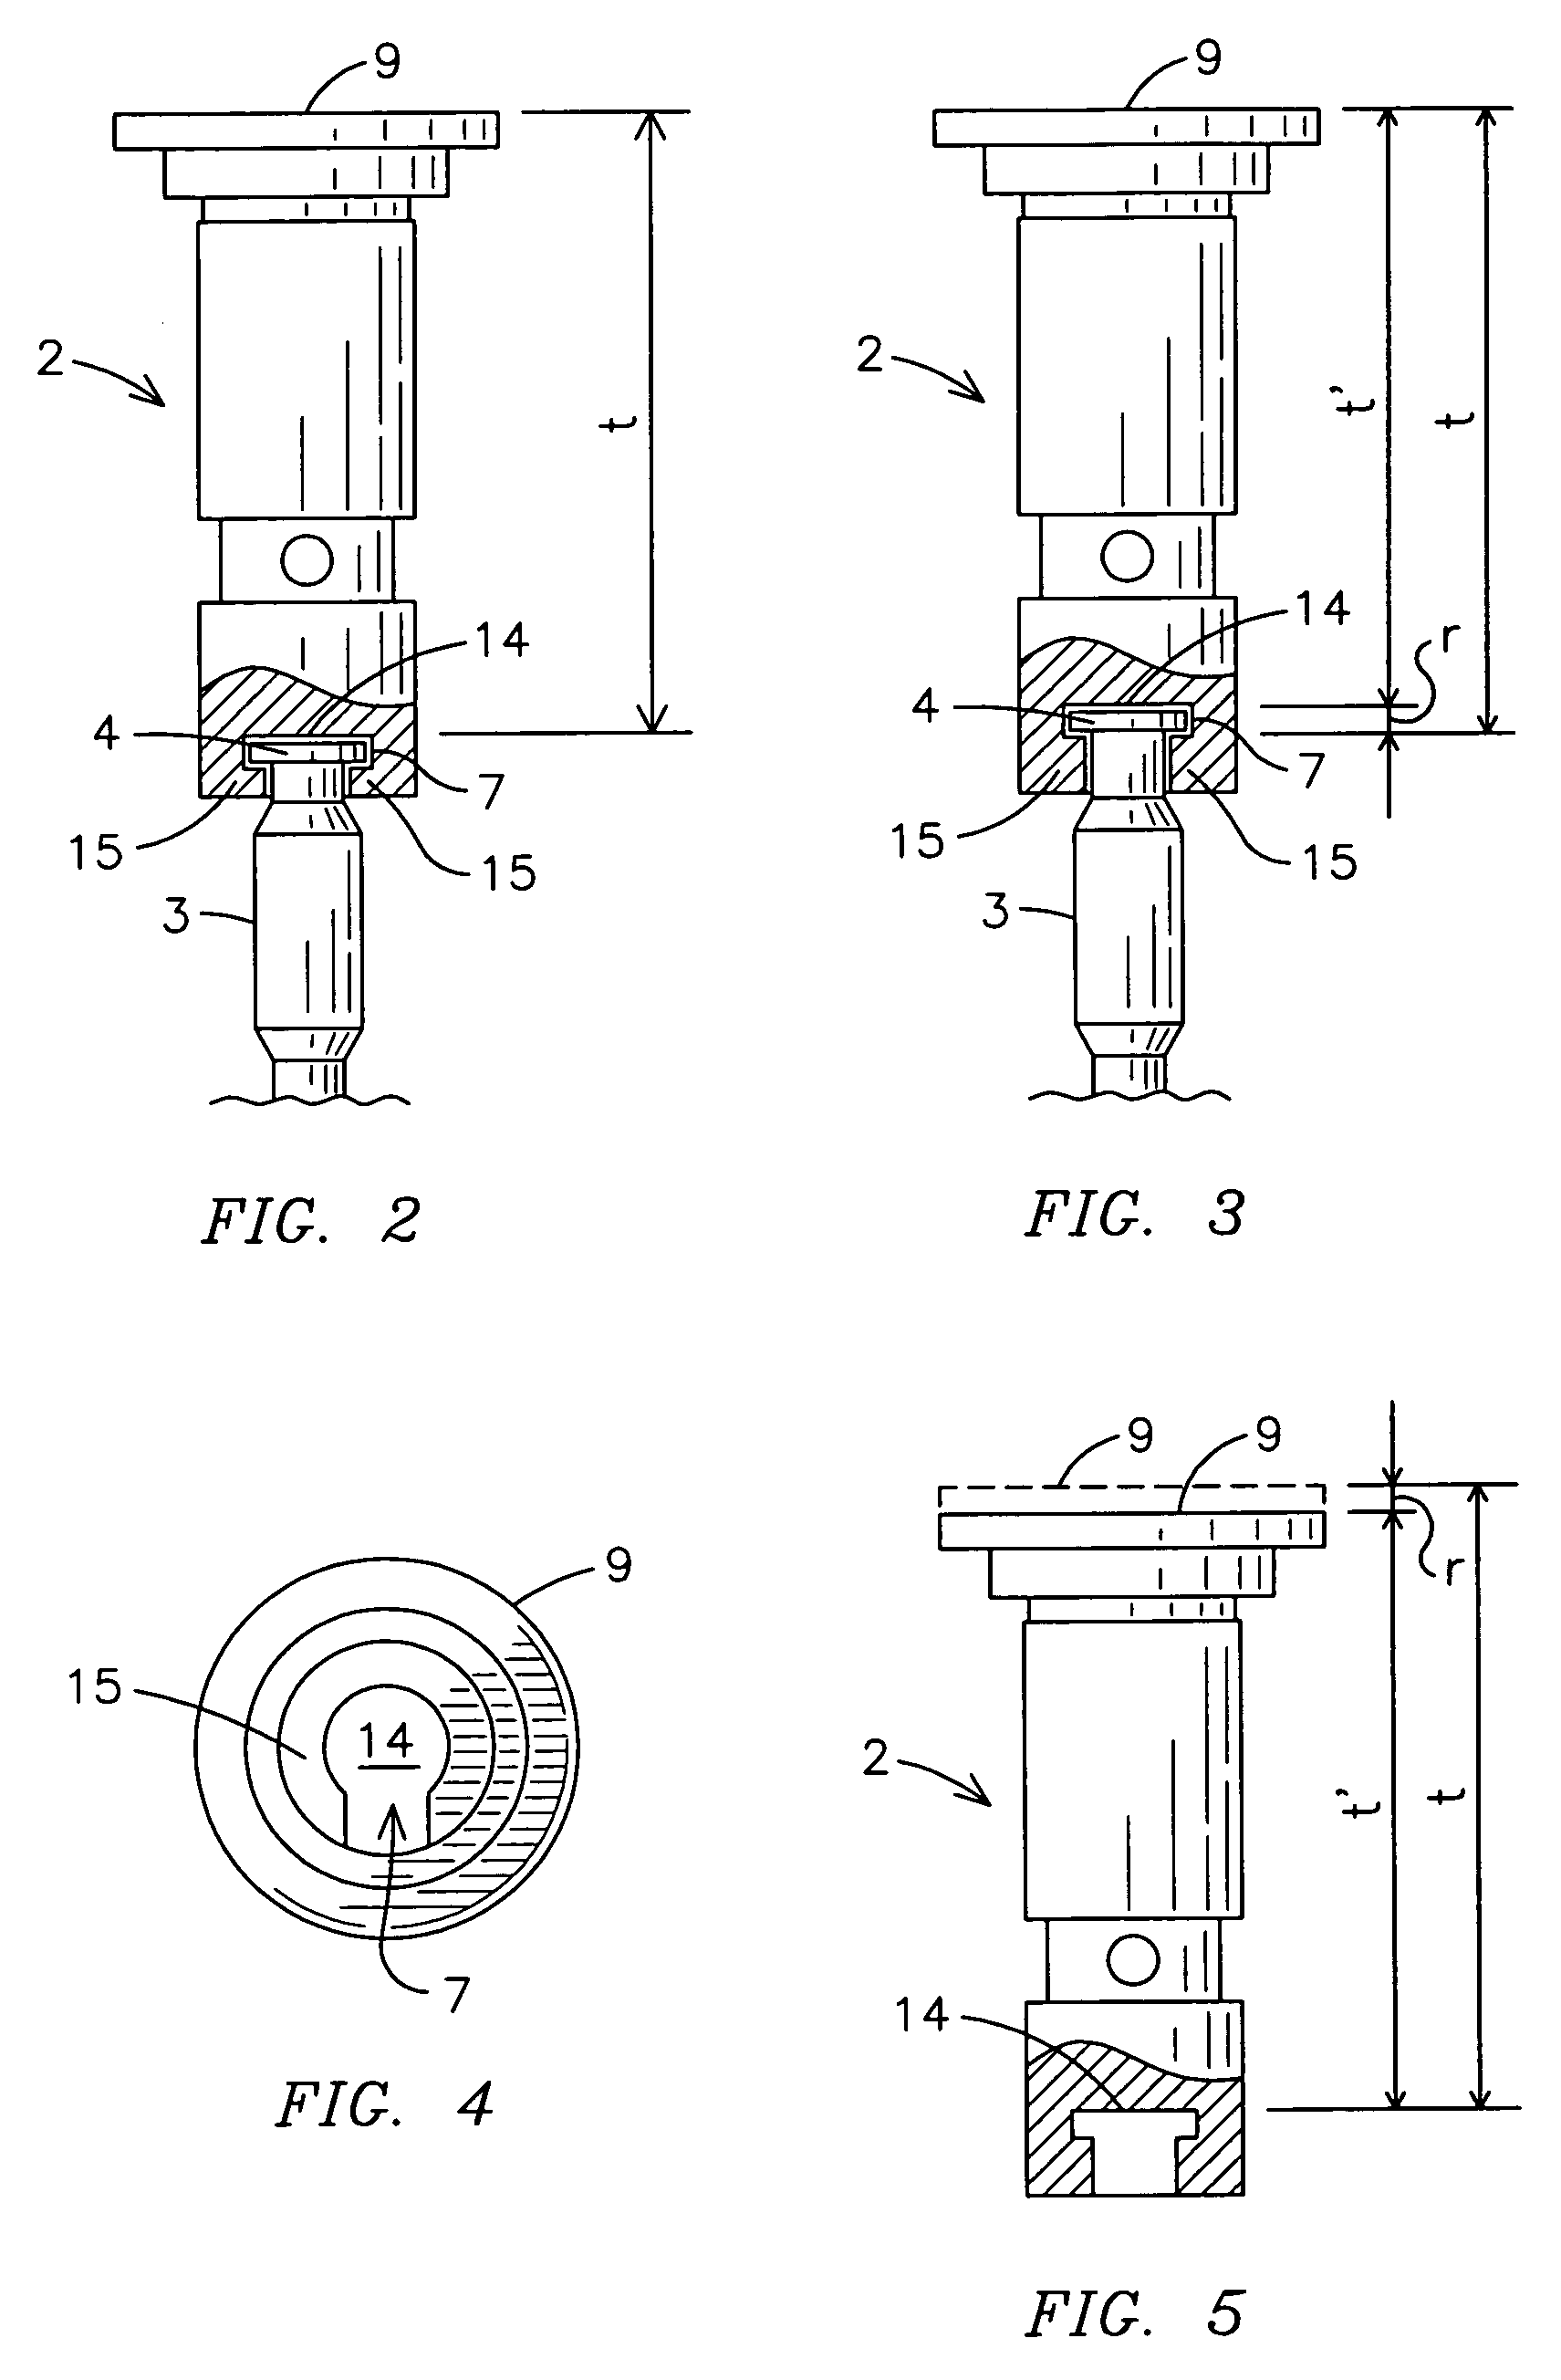 Methods of retarding injection timing of mechanical unit injectors using a modified pump follower